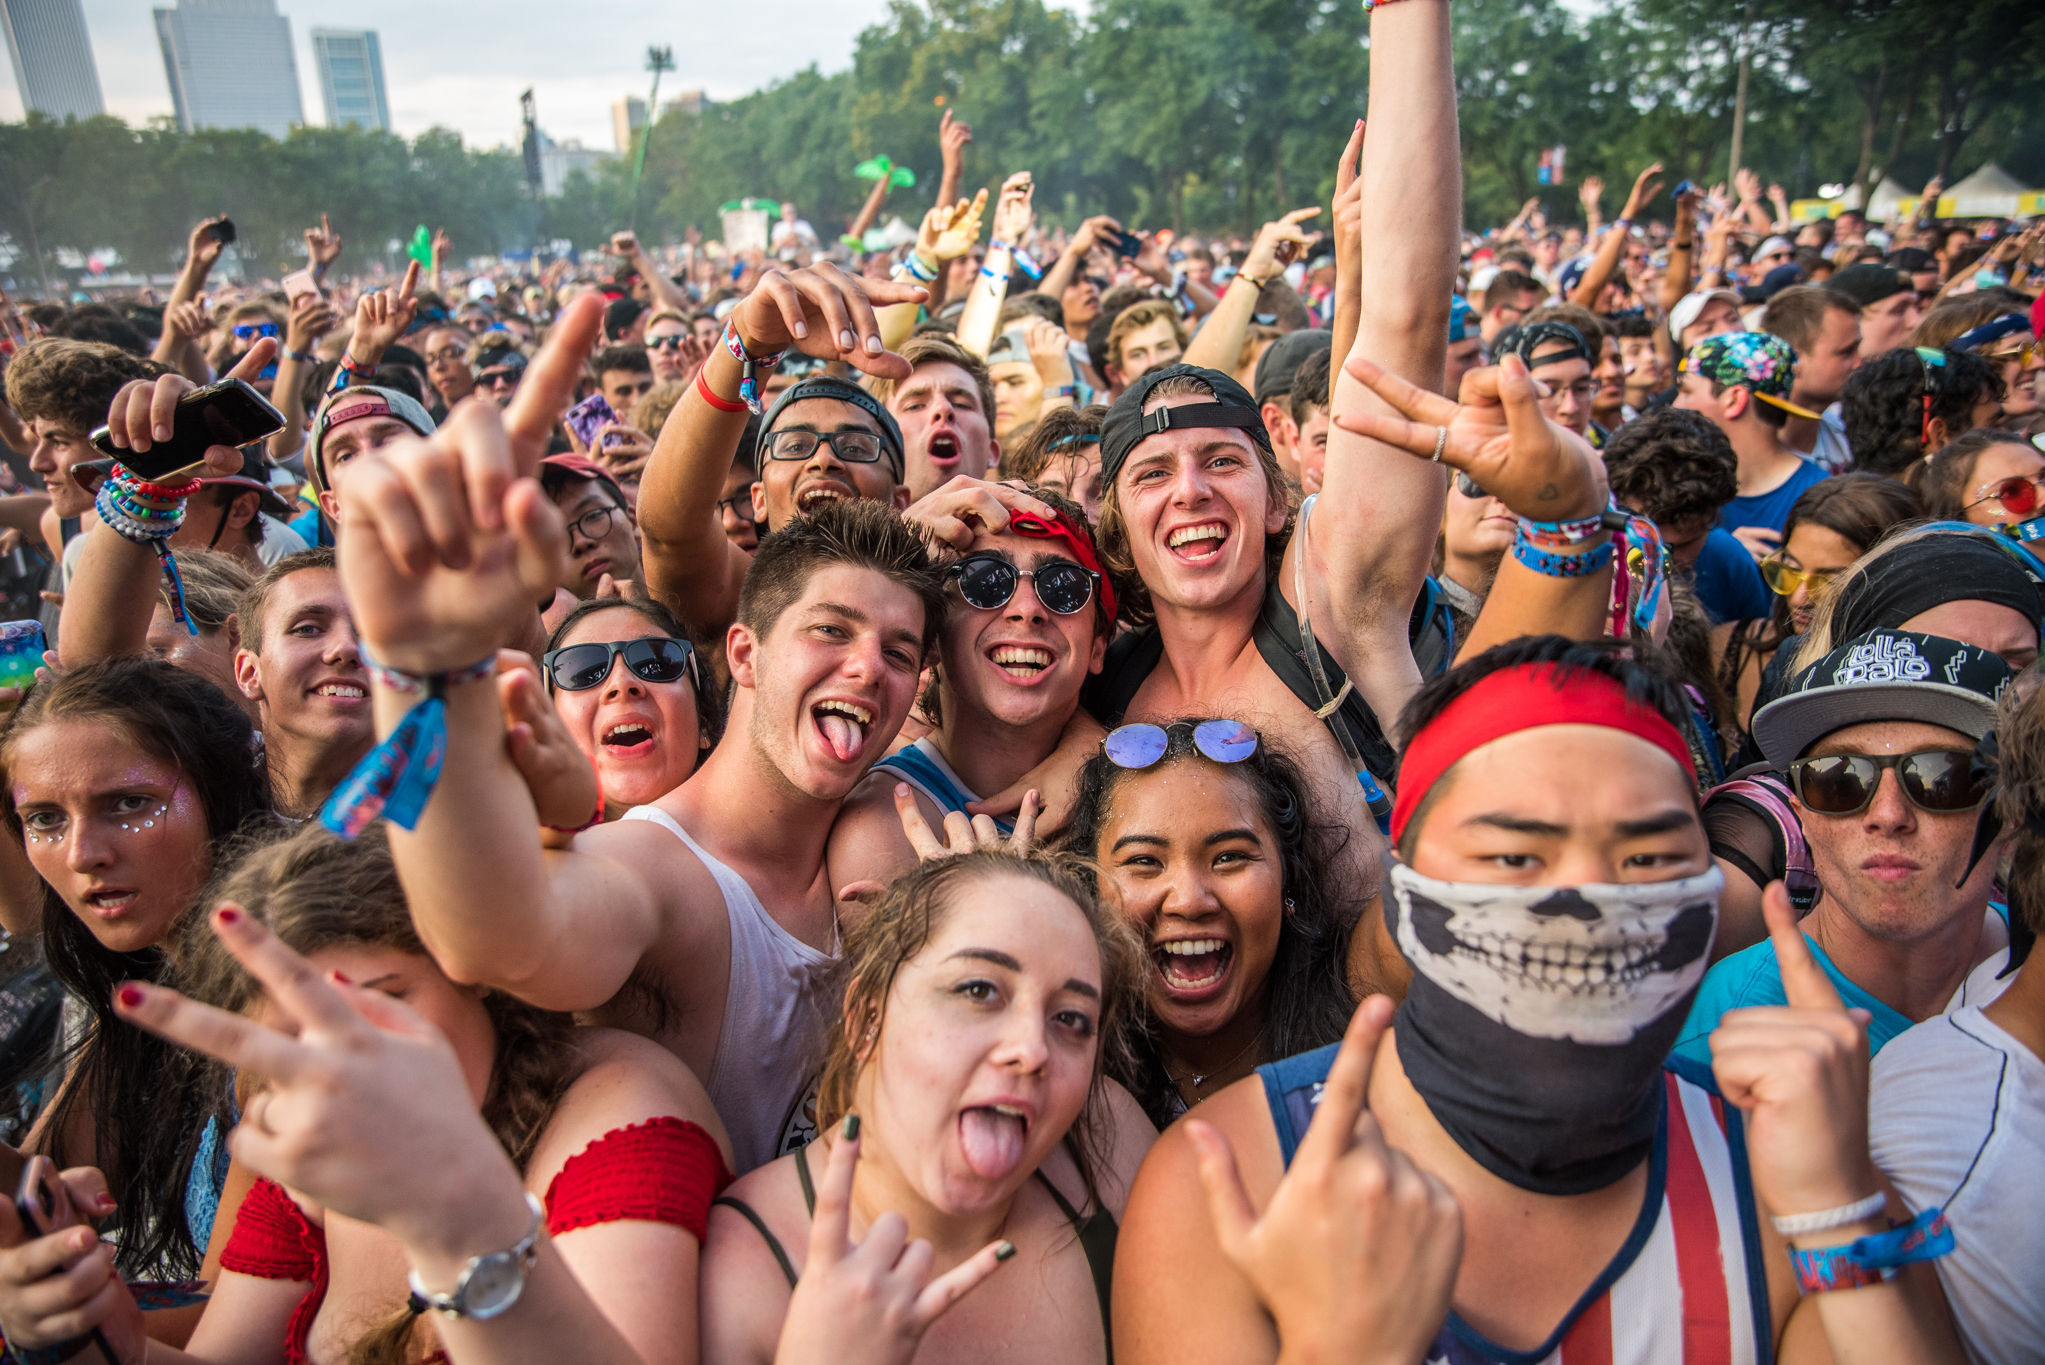 The complete Lollapalooza 2018 schedule has arrived